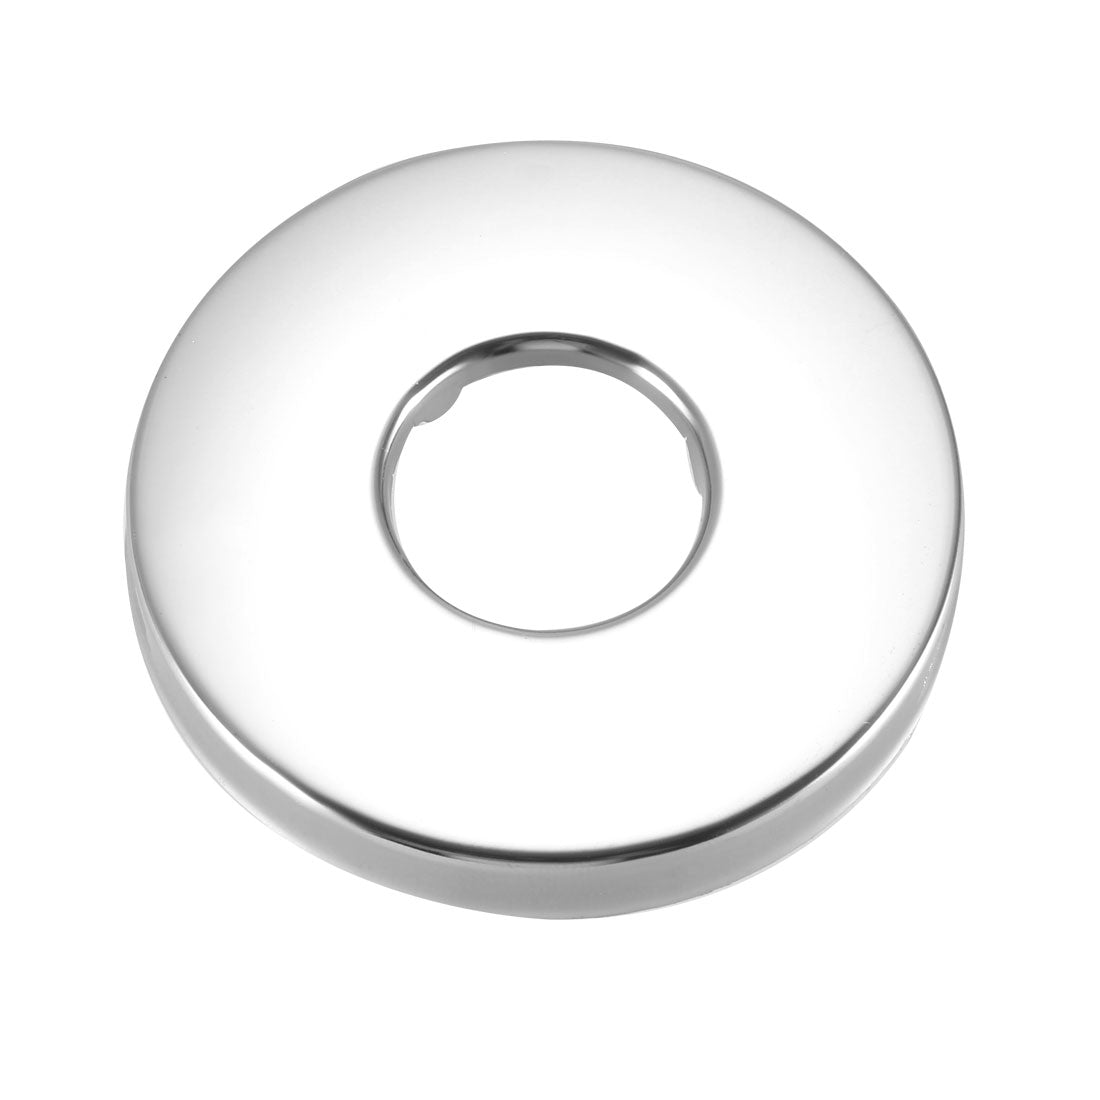 uxcell Uxcell Round Escutcheon Plate 58x7mm Stainless Steel Polishing for 21mm Diameter Pipe 2Pcs